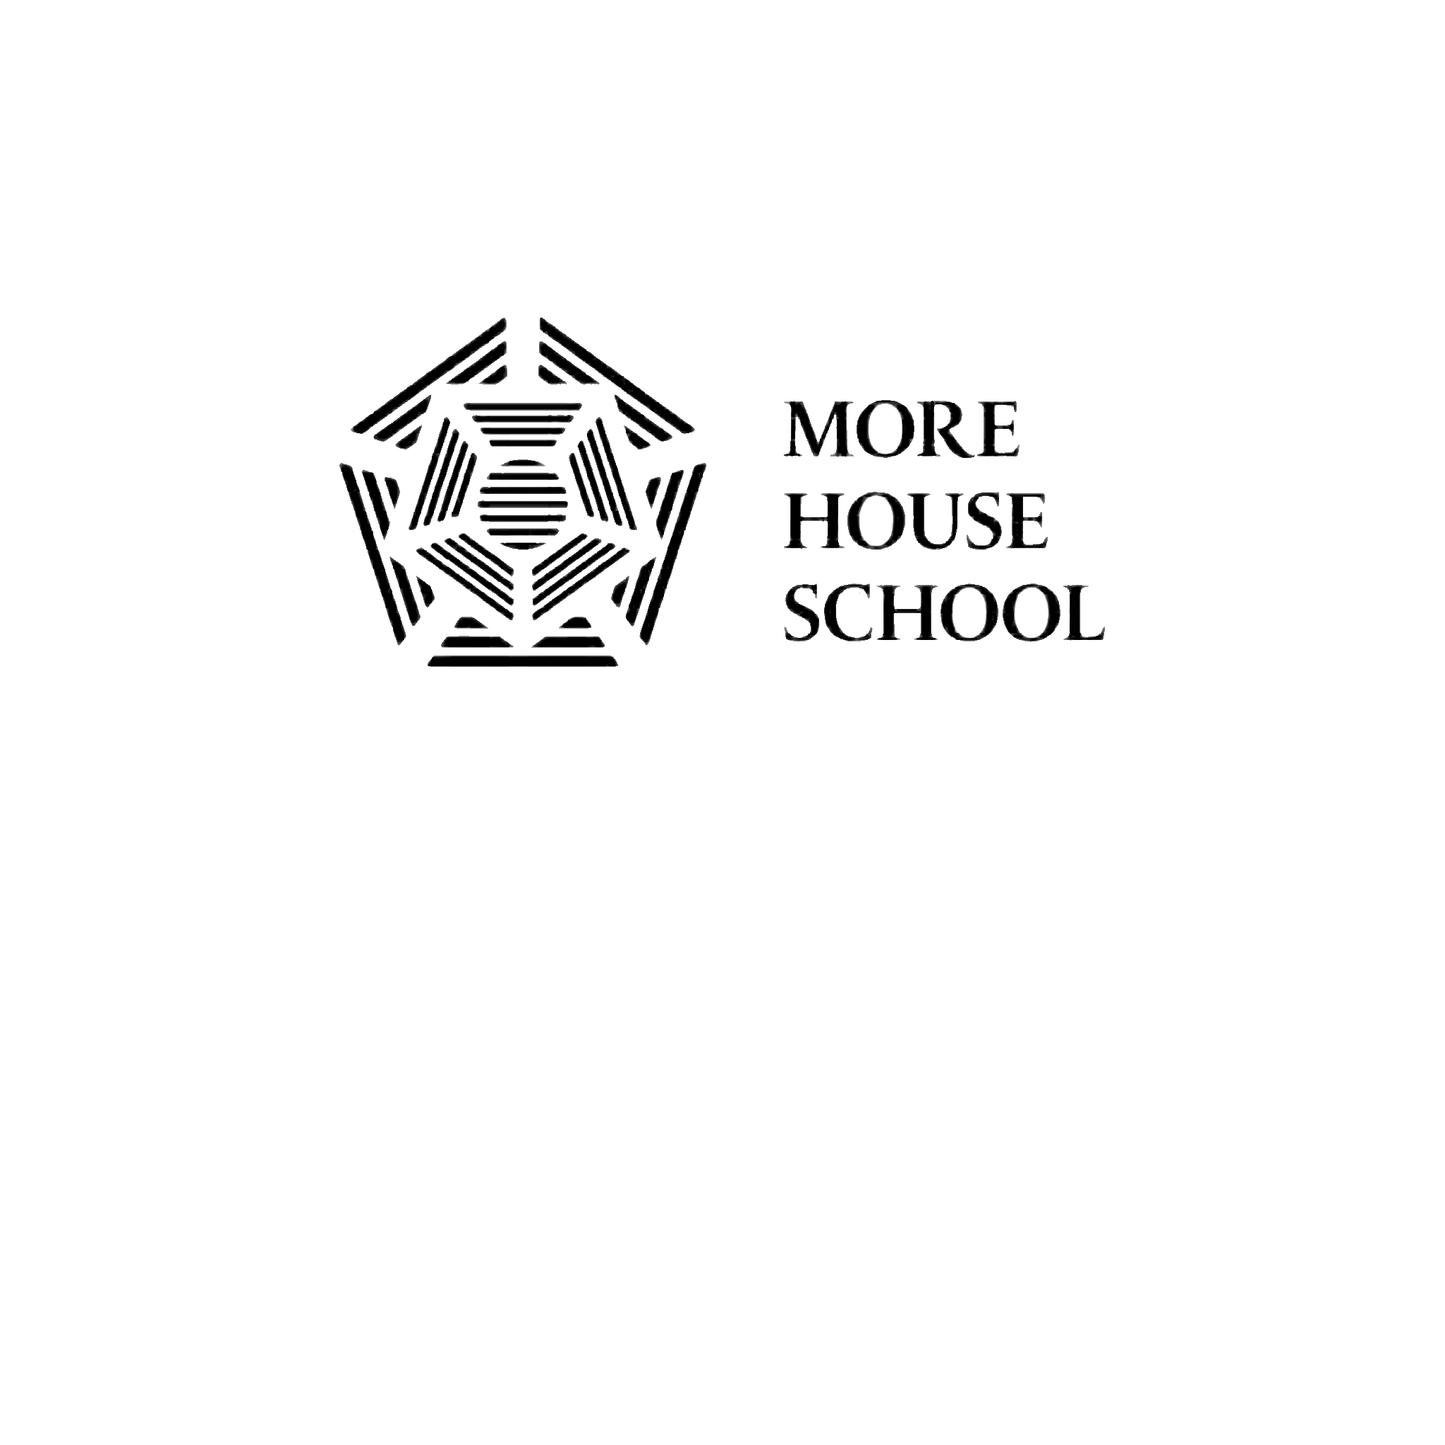 More House School: 11+ English (2015) [Version: Group 1]